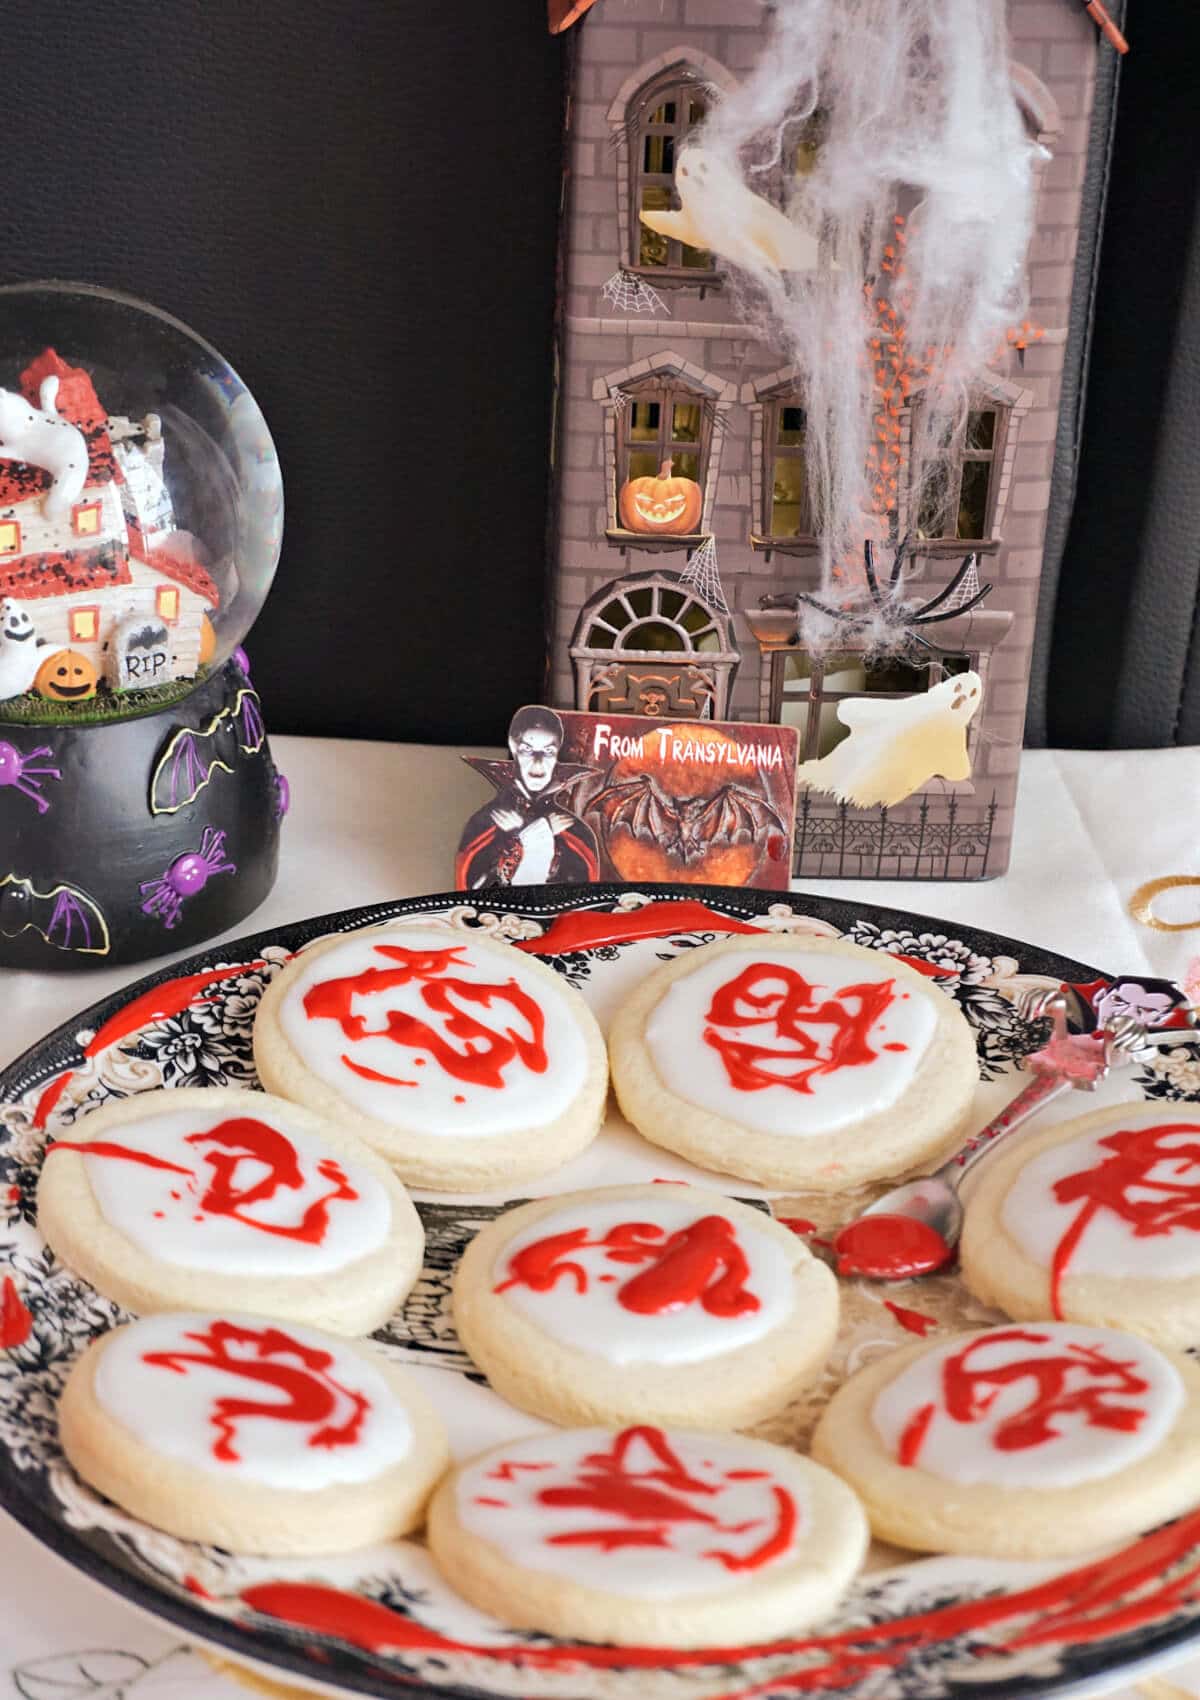 A plate with 8 halloween cookies and decorations around.